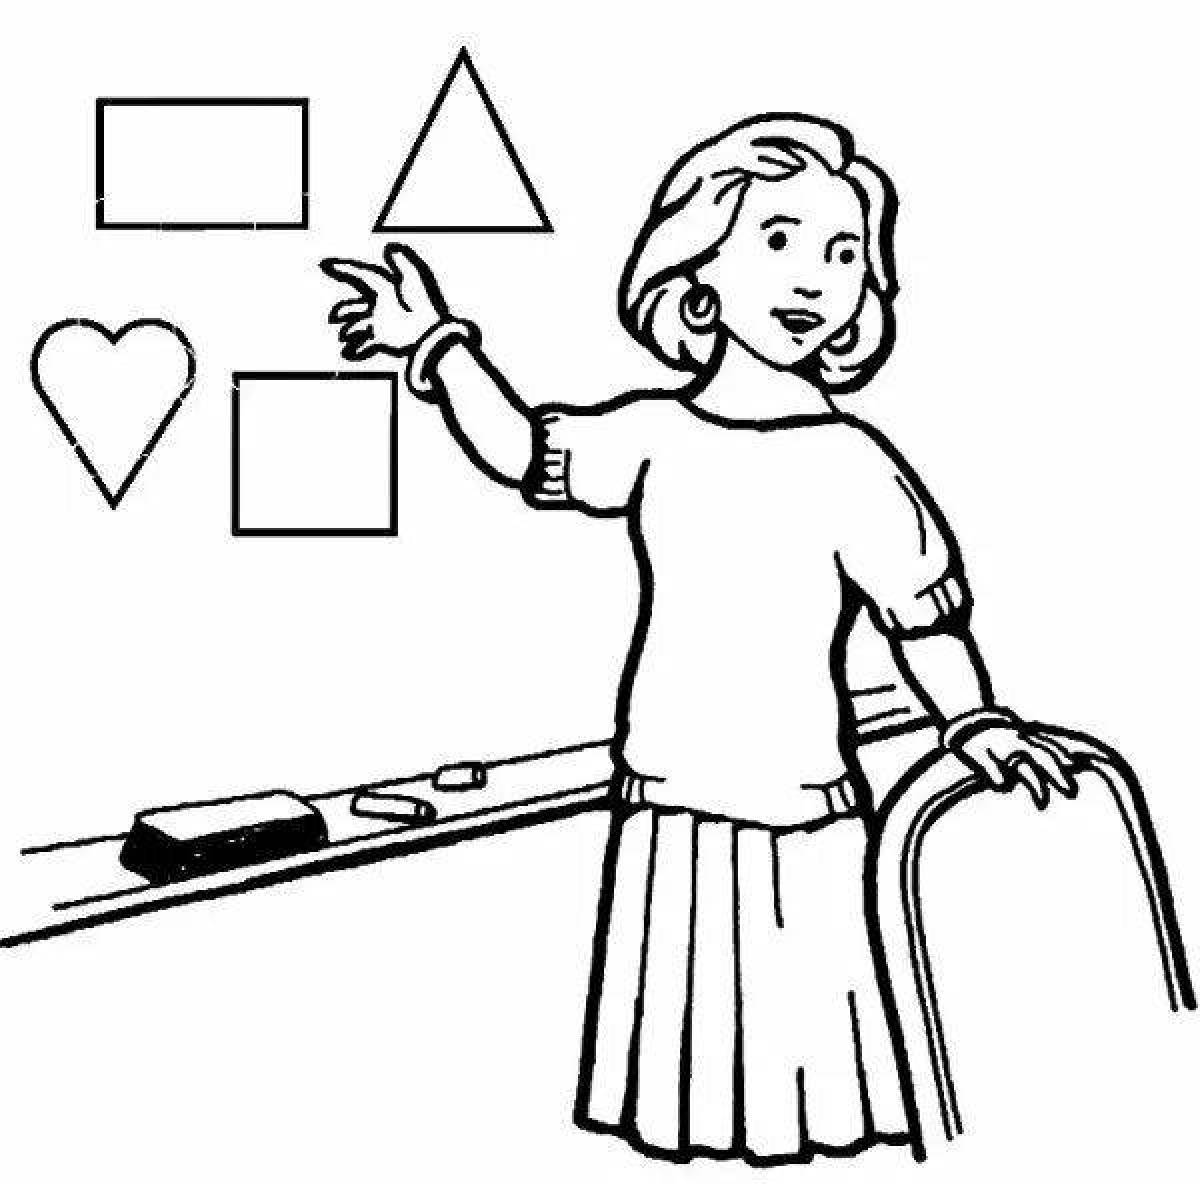 Engaged teacher and student coloring pages